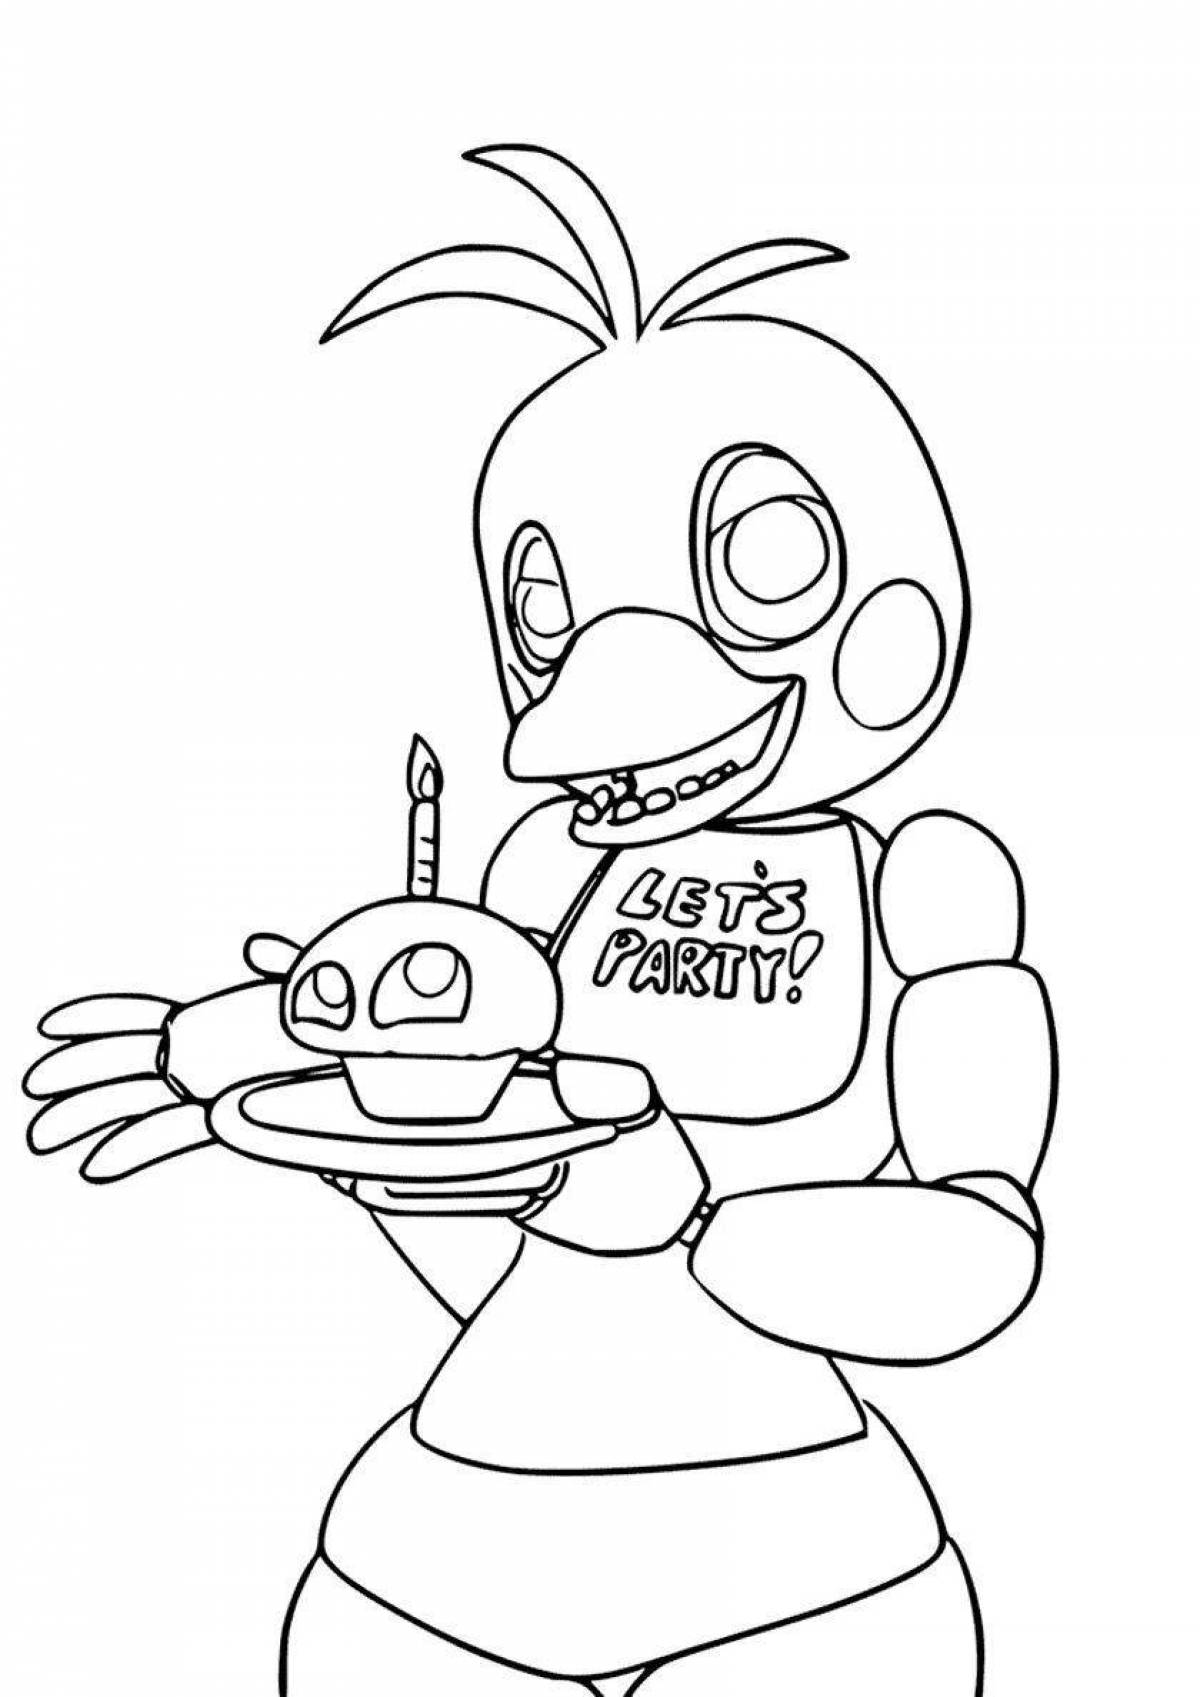 Joyful freddy and chica coloring book